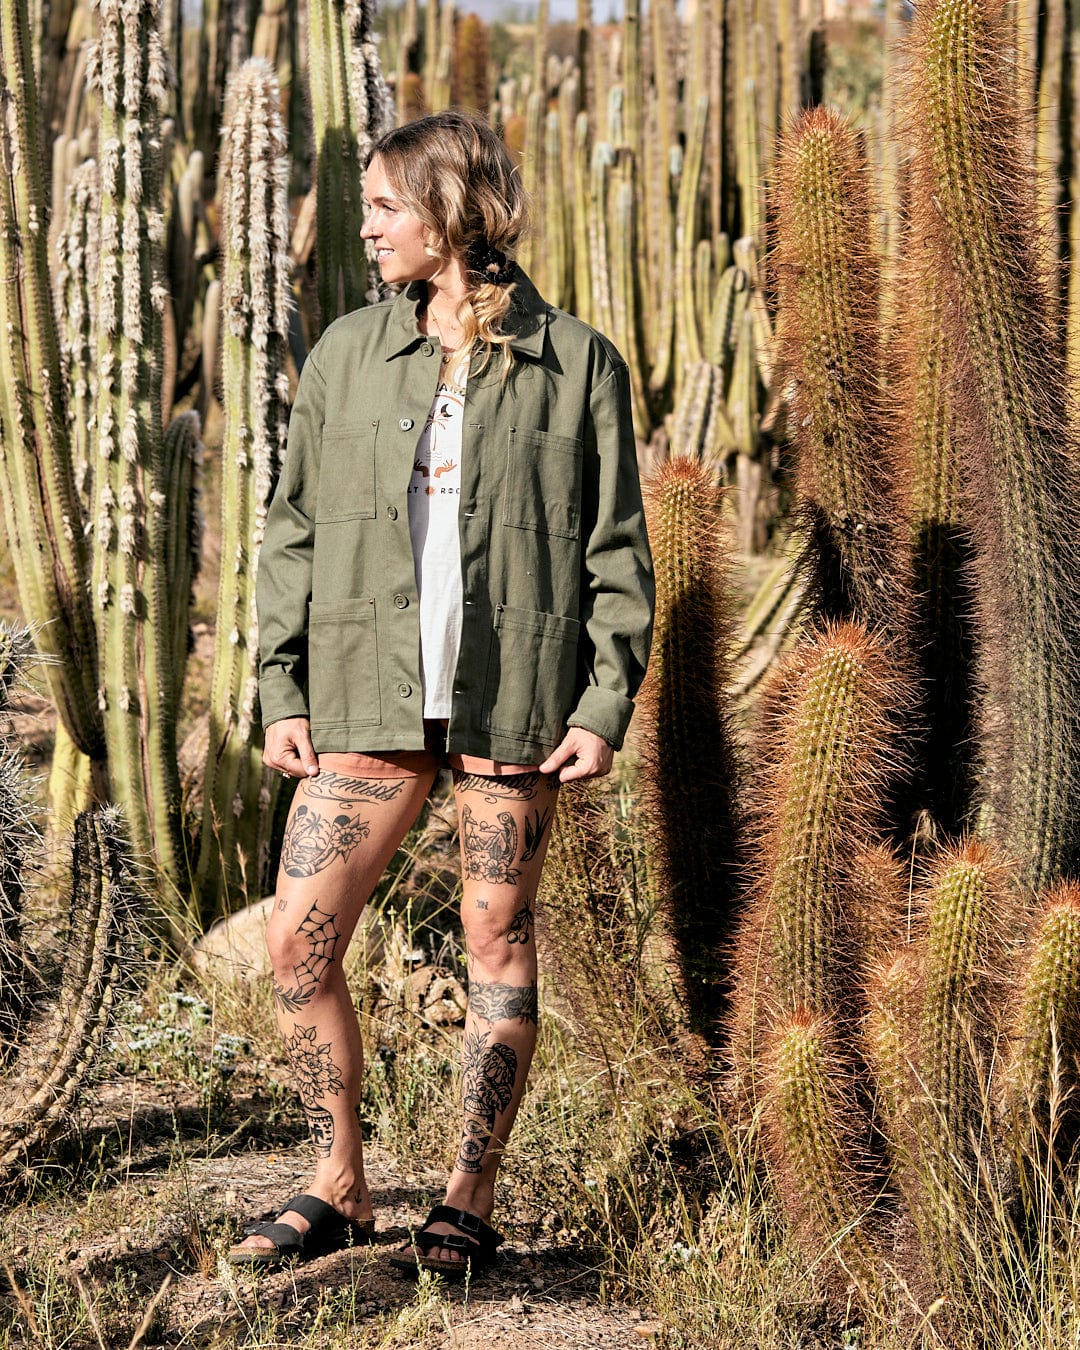 Woman with tattoos standing among tall cacti in a desert landscape, wearing a Saltrock Barden - Womens Lightweight Utility Jacket in Dark Green and shorts.